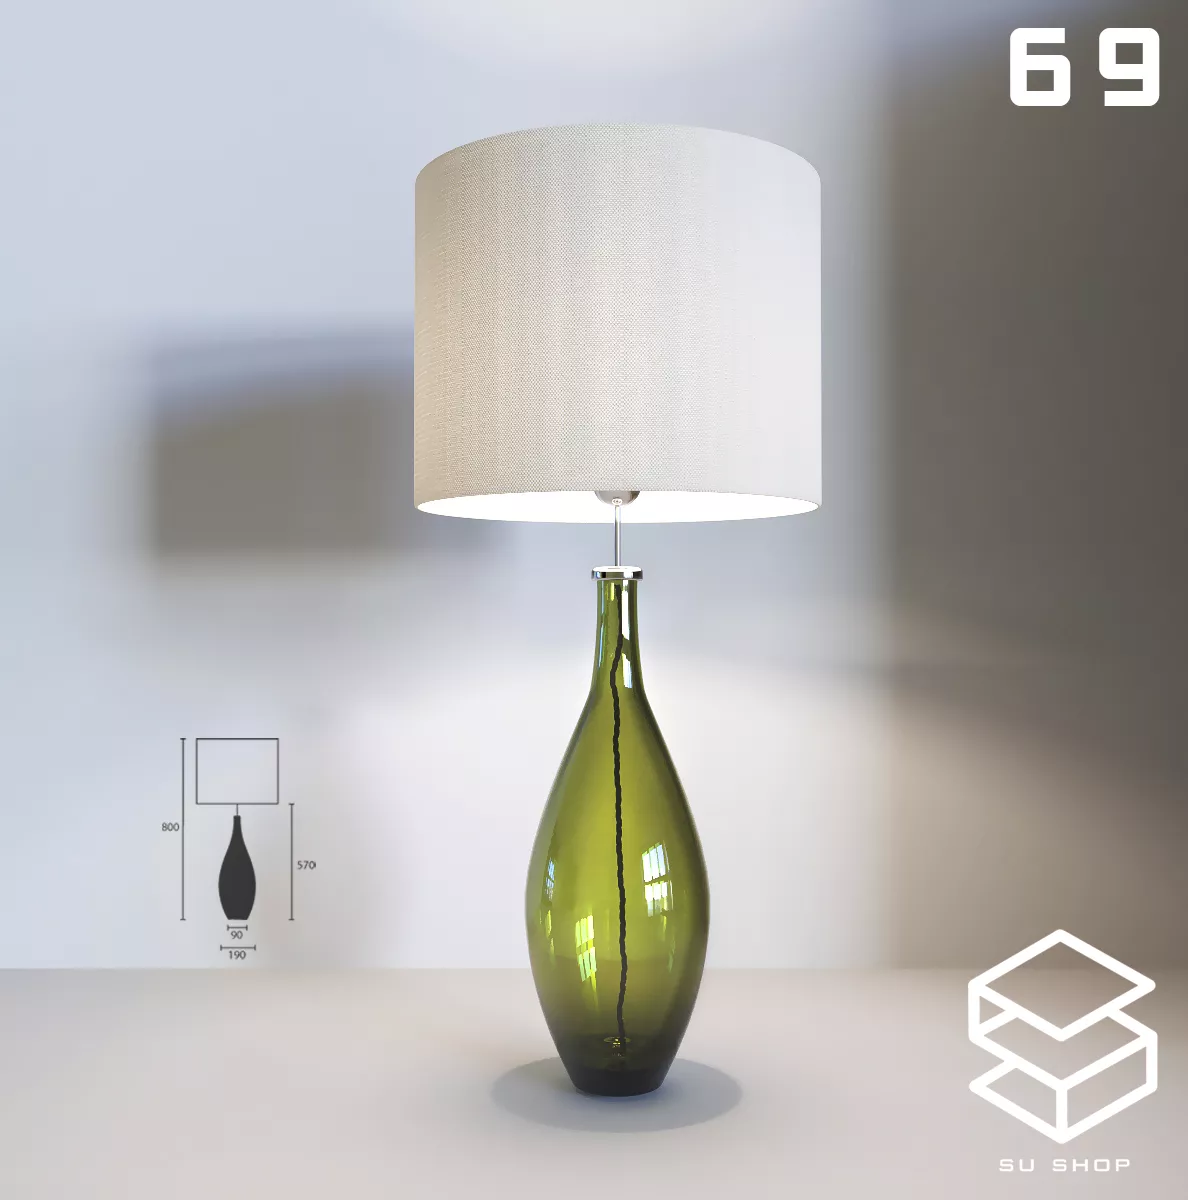 MODERN TABLE LAMP - SKETCHUP 3D MODEL - VRAY OR ENSCAPE - ID14865